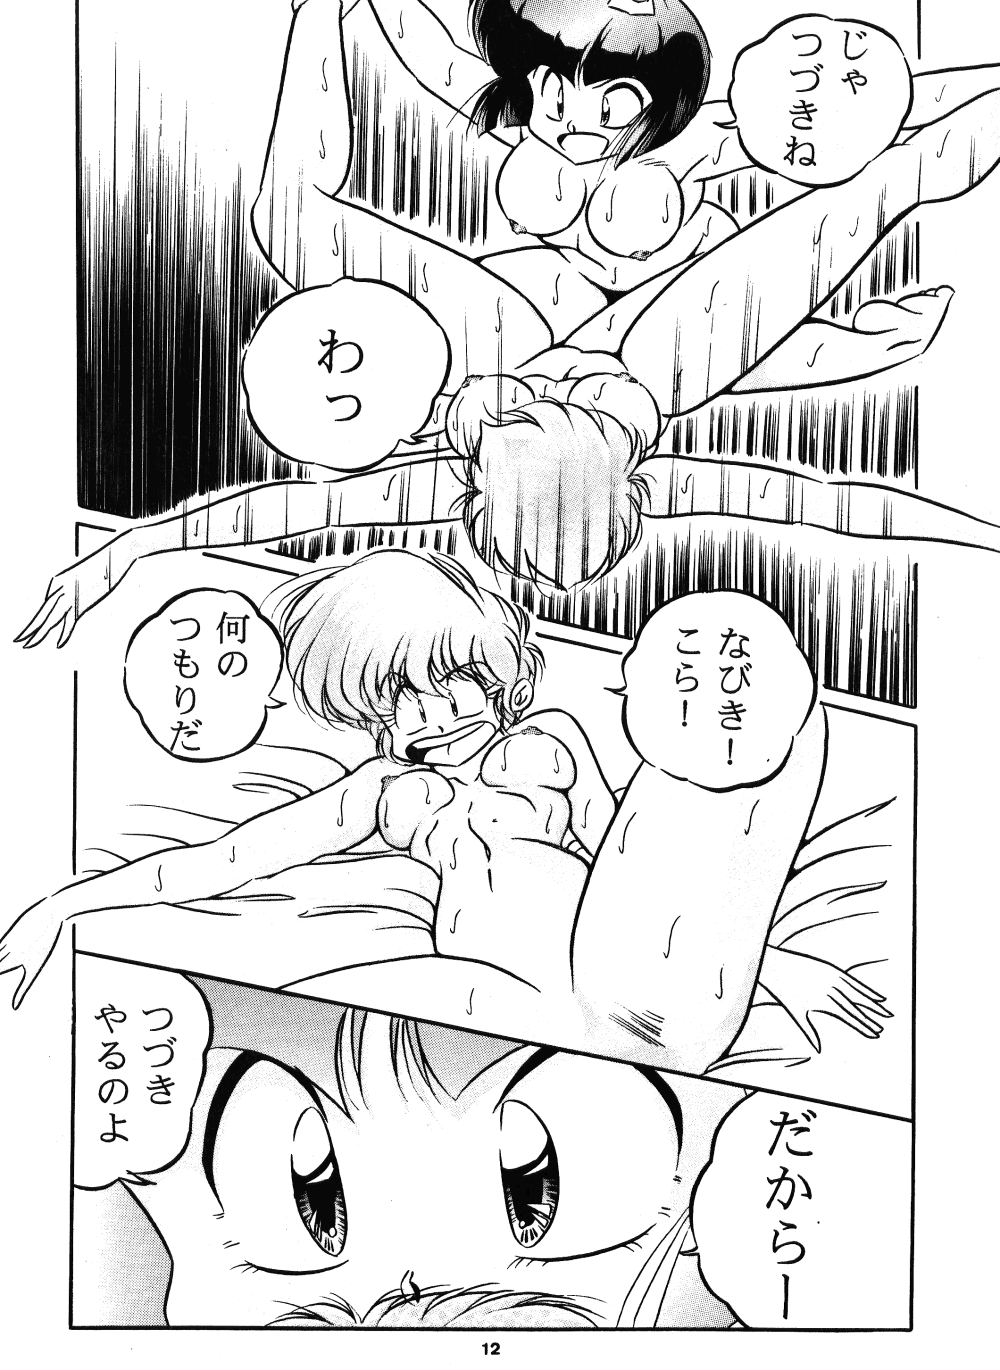 [C-Company] C-COMPANY SPECIAL STAGE 15 (Darkstalkers, Ranma 1/2) page 13 full